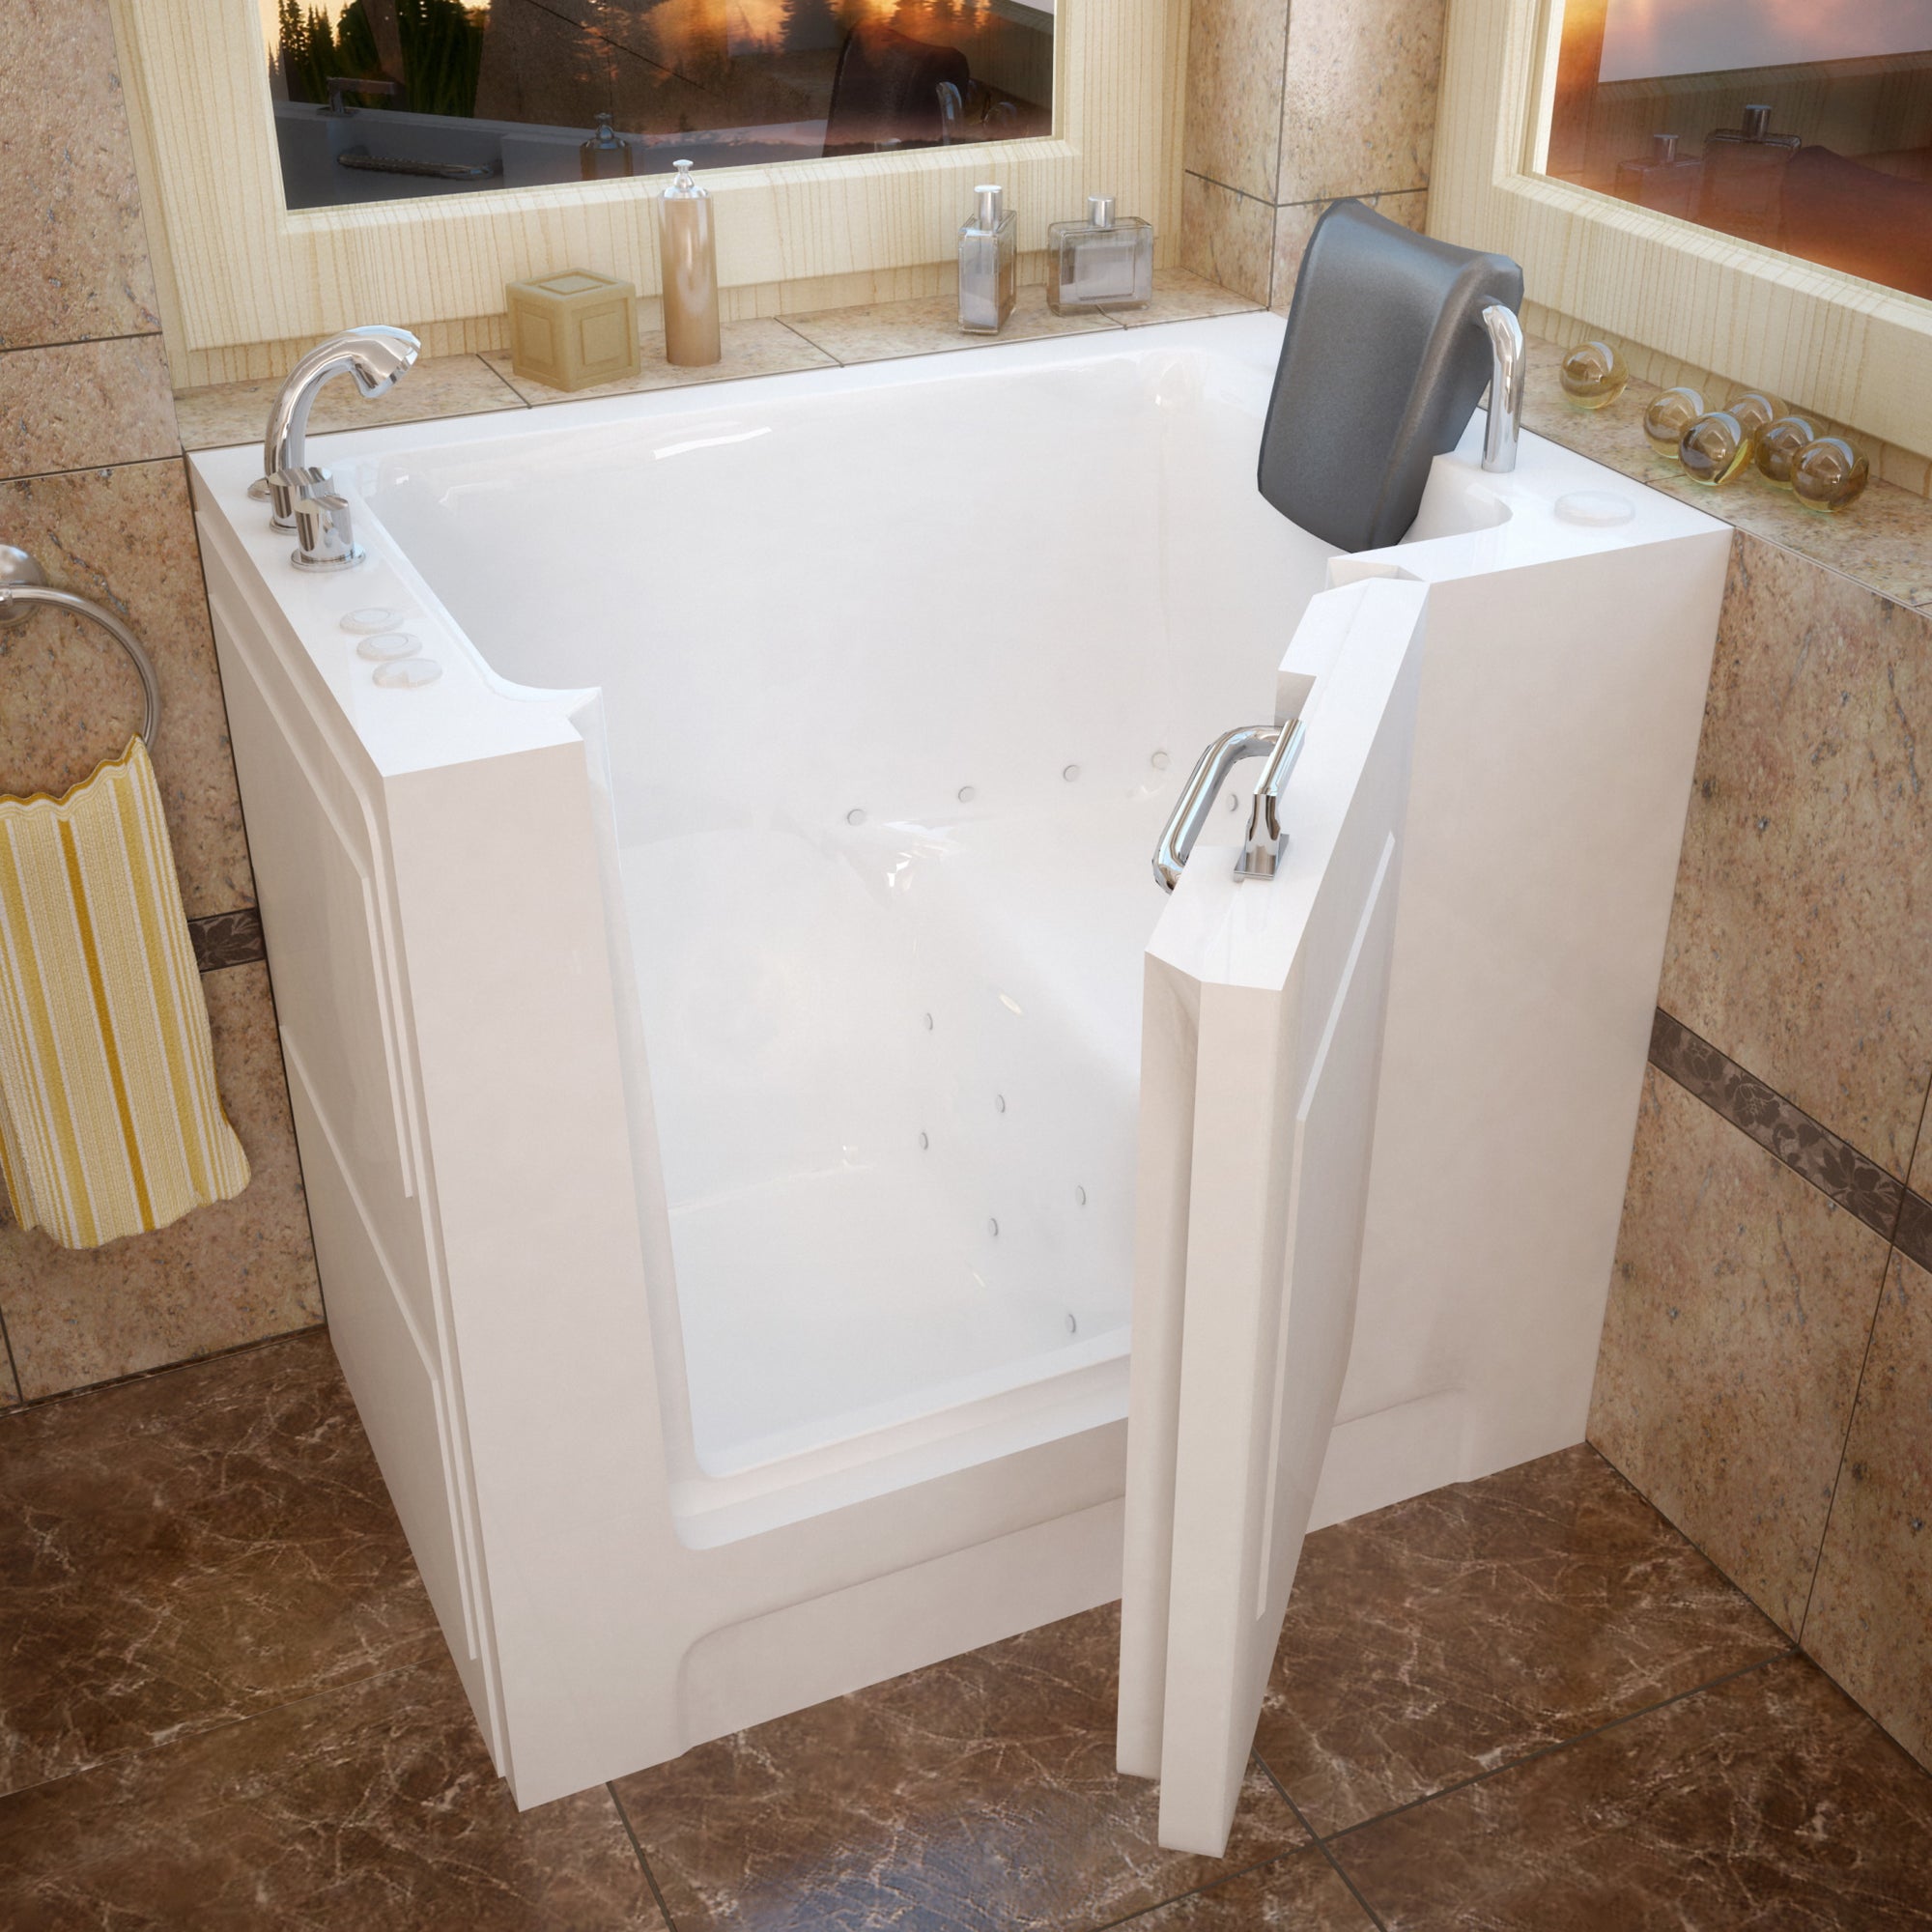 Meditub 27 x 39 White Walk-In Bathtub - High grade marine fiberglass with acrylic coating - White Finish and color matching trim - Outward swinging door - with 6 in. Threshold & 17 in. Seat Height, Built-in grab bar - Left Drain - Air Jetted - Lifestyle - 2739 - Vital Hydrotherapy